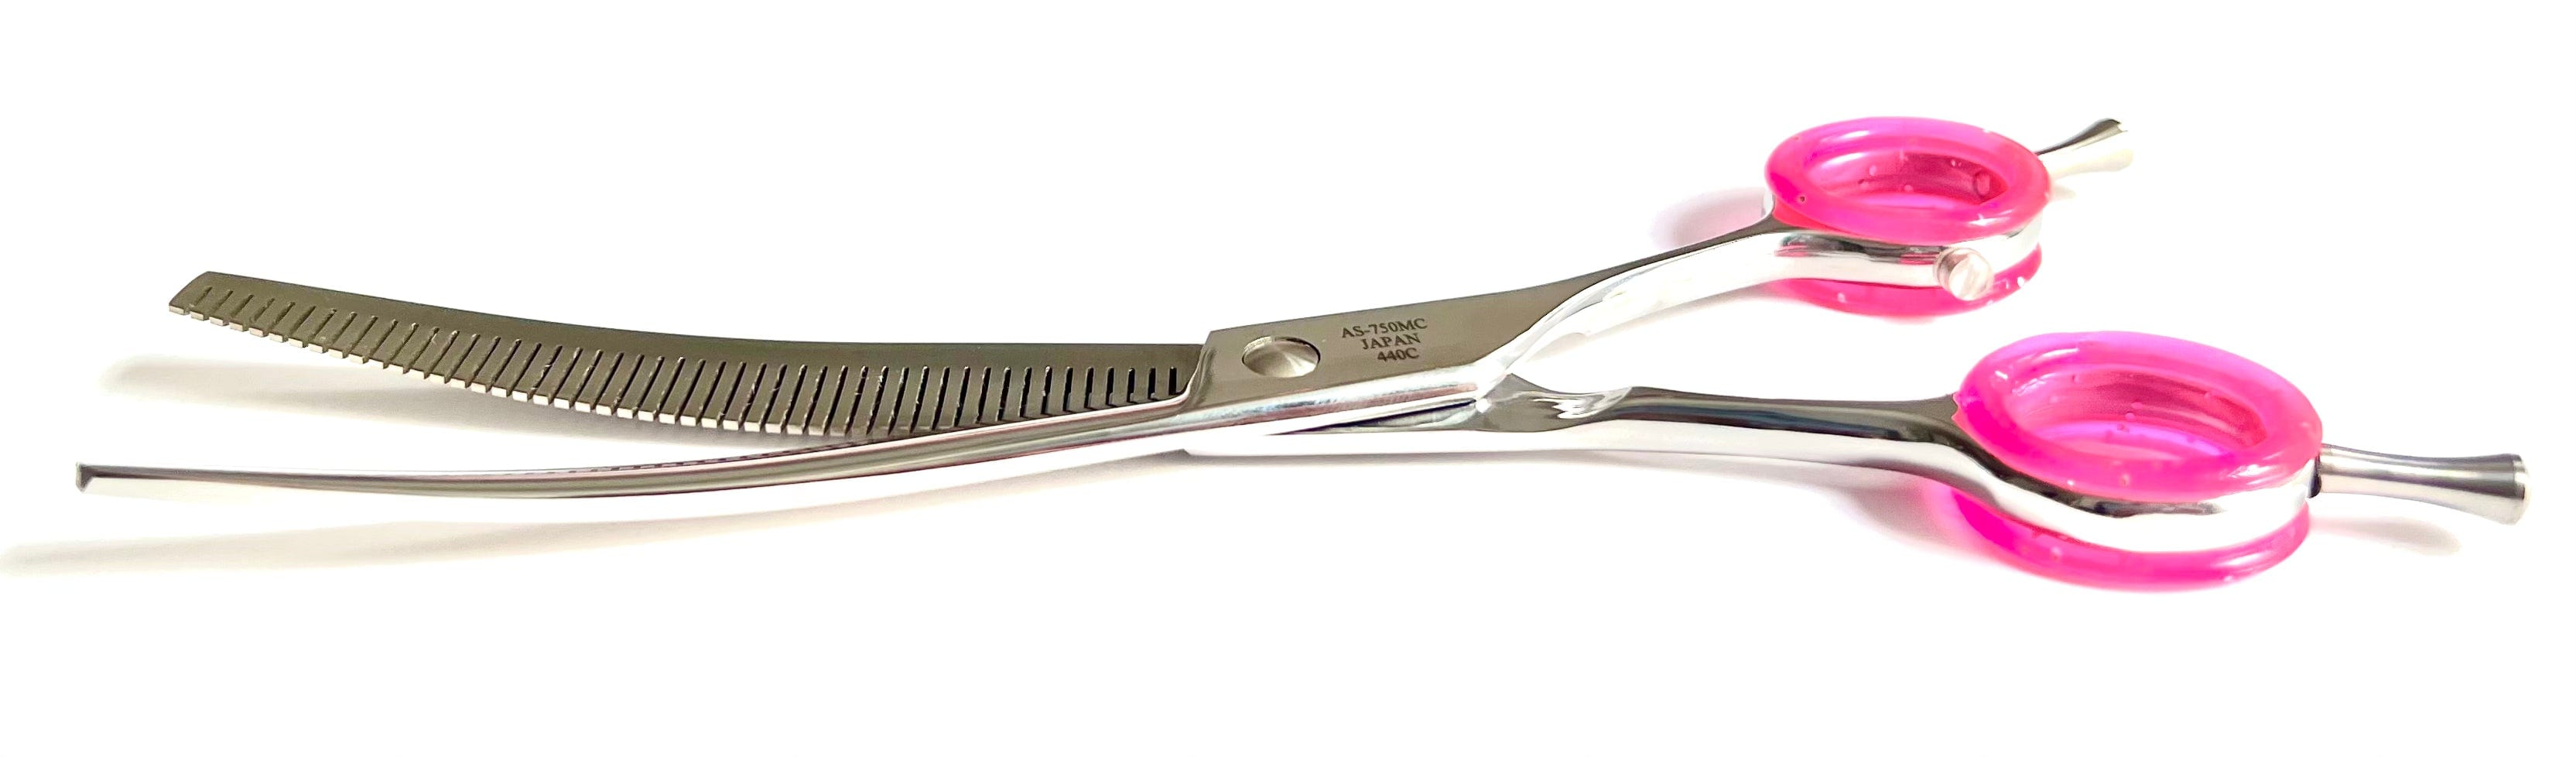 Abbfabb Grooming Scissors ltd 7.5" 40 Piano Teeth Reversible Curved Thinning Dog Grooming Scissor. 7.5" Flippable Curved Fluffer